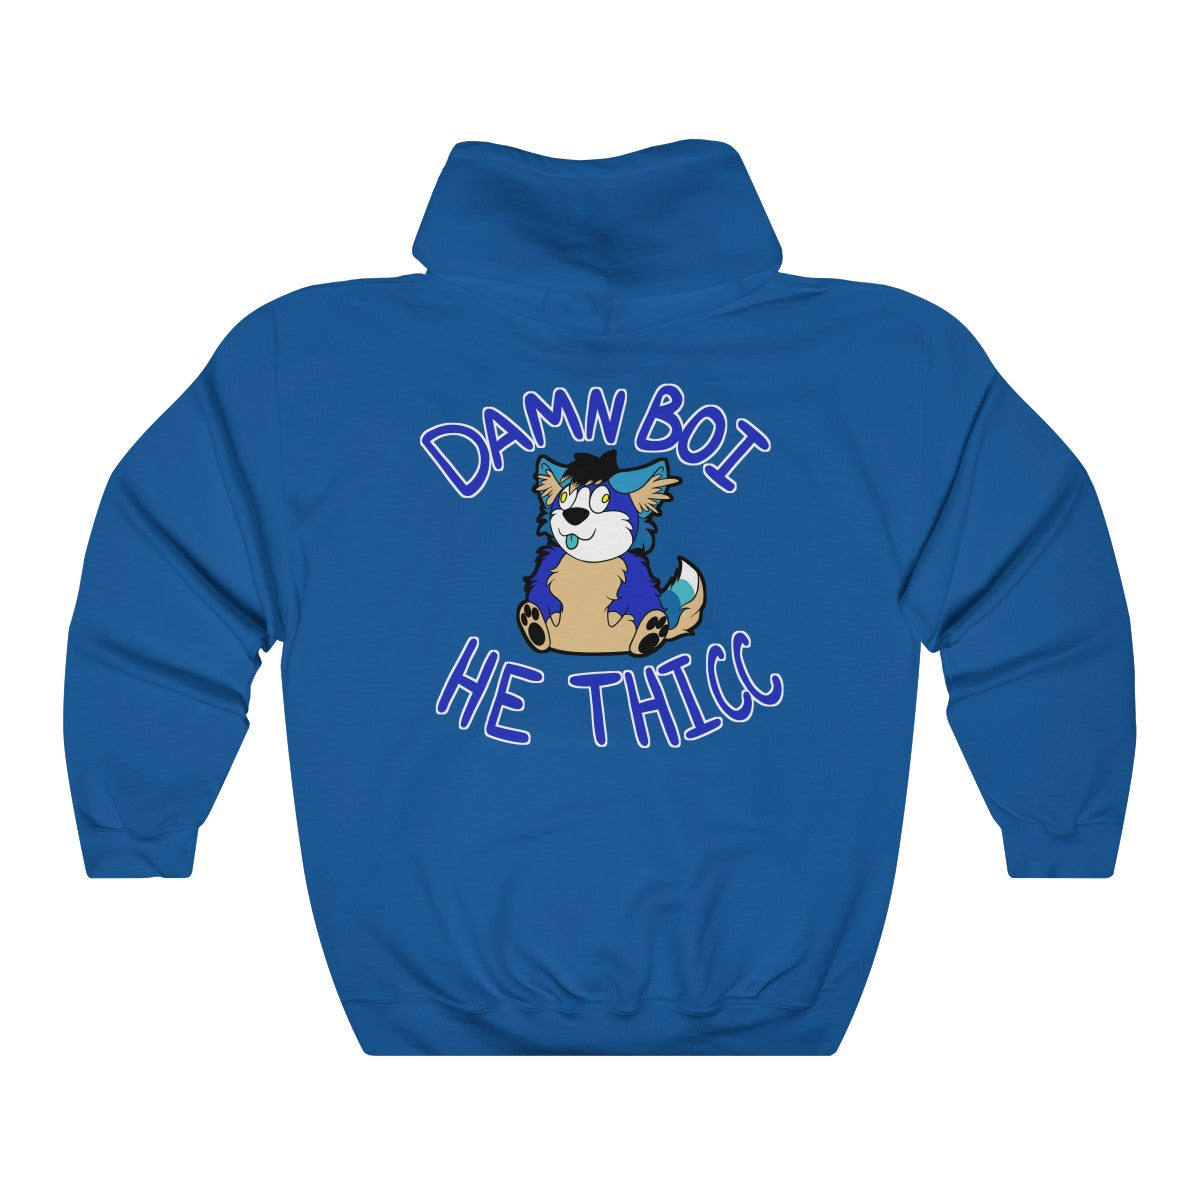 Thicc Boi With Text - Hoodie Hoodie AFLT-Hund The Hound Royal Blue S 